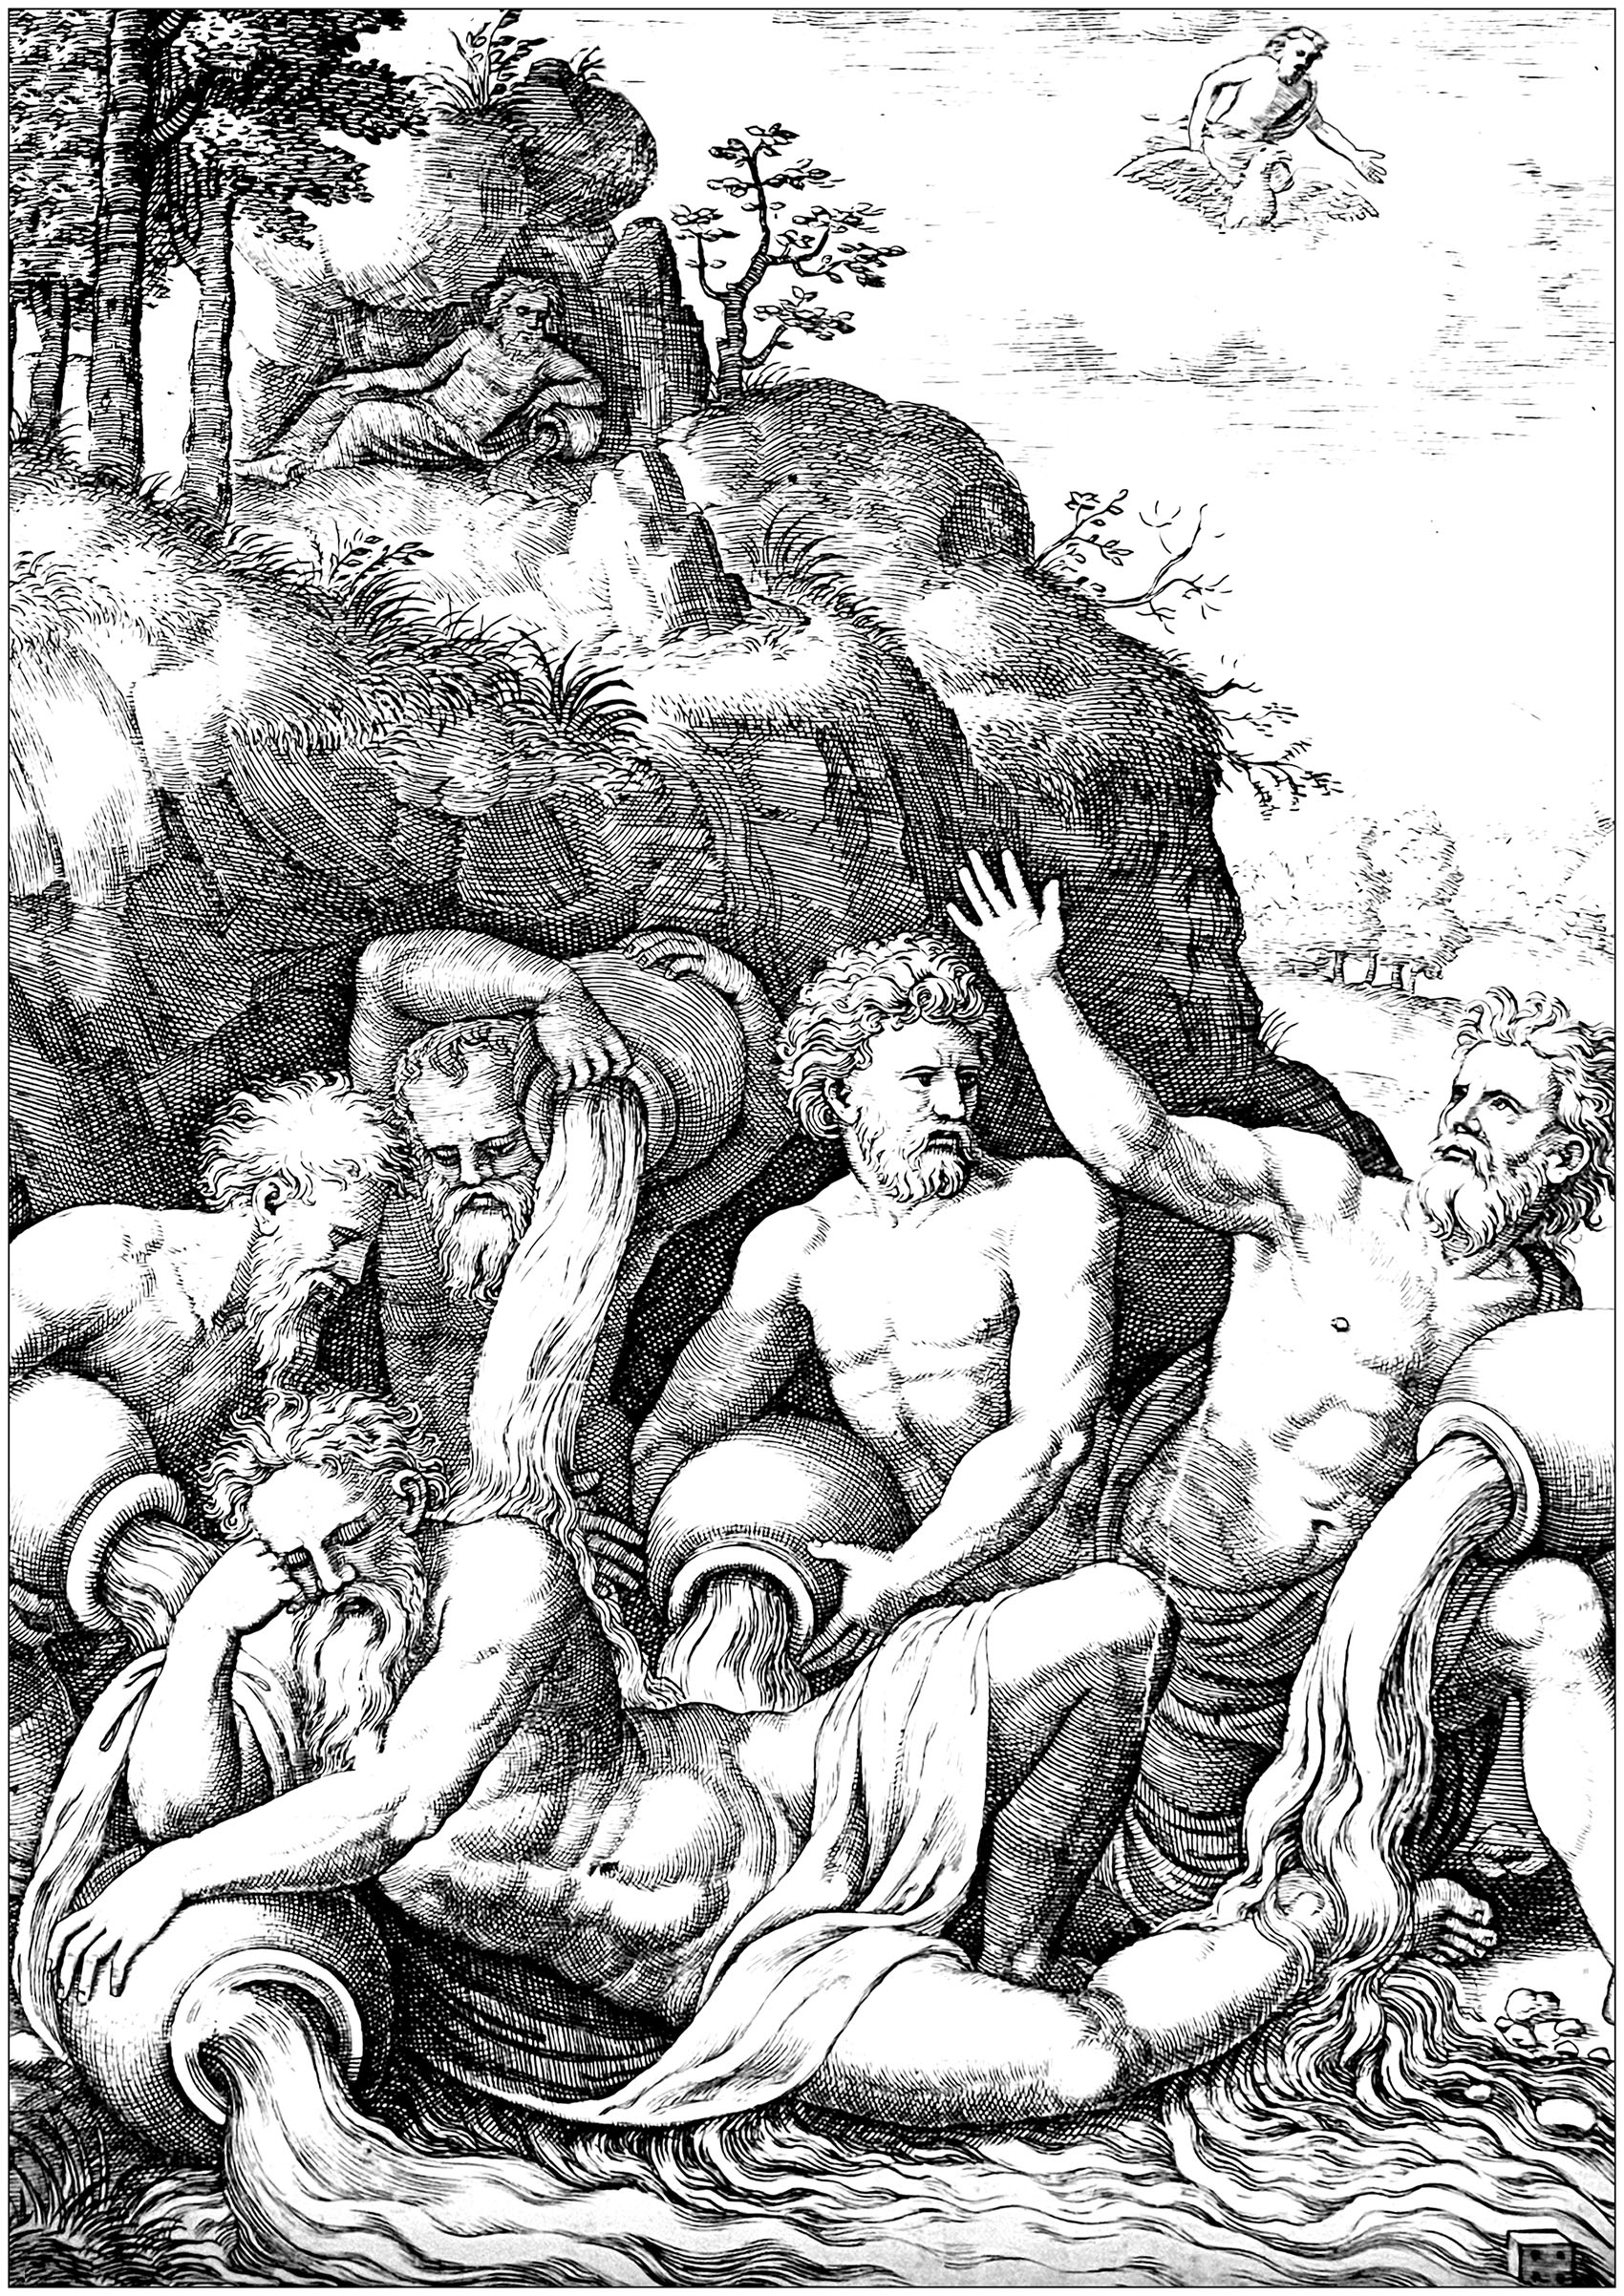 Coloring page from an engraving from 16th century representing the rivers coming to console Peneus after the rape of his daughter by Apollo, her death and her metamorphosis into a laurel (Story of Apollo and Daphne).  By Bernardo Daddi (1512-1570), known as The Master of the Dice, after Peruzzi. At the bottom right a dice in the water of the rivers indicates 4 points on its visible face: it signs the engraving as being from the master of the dice, and indicates that this engraving is the 4th in the series.